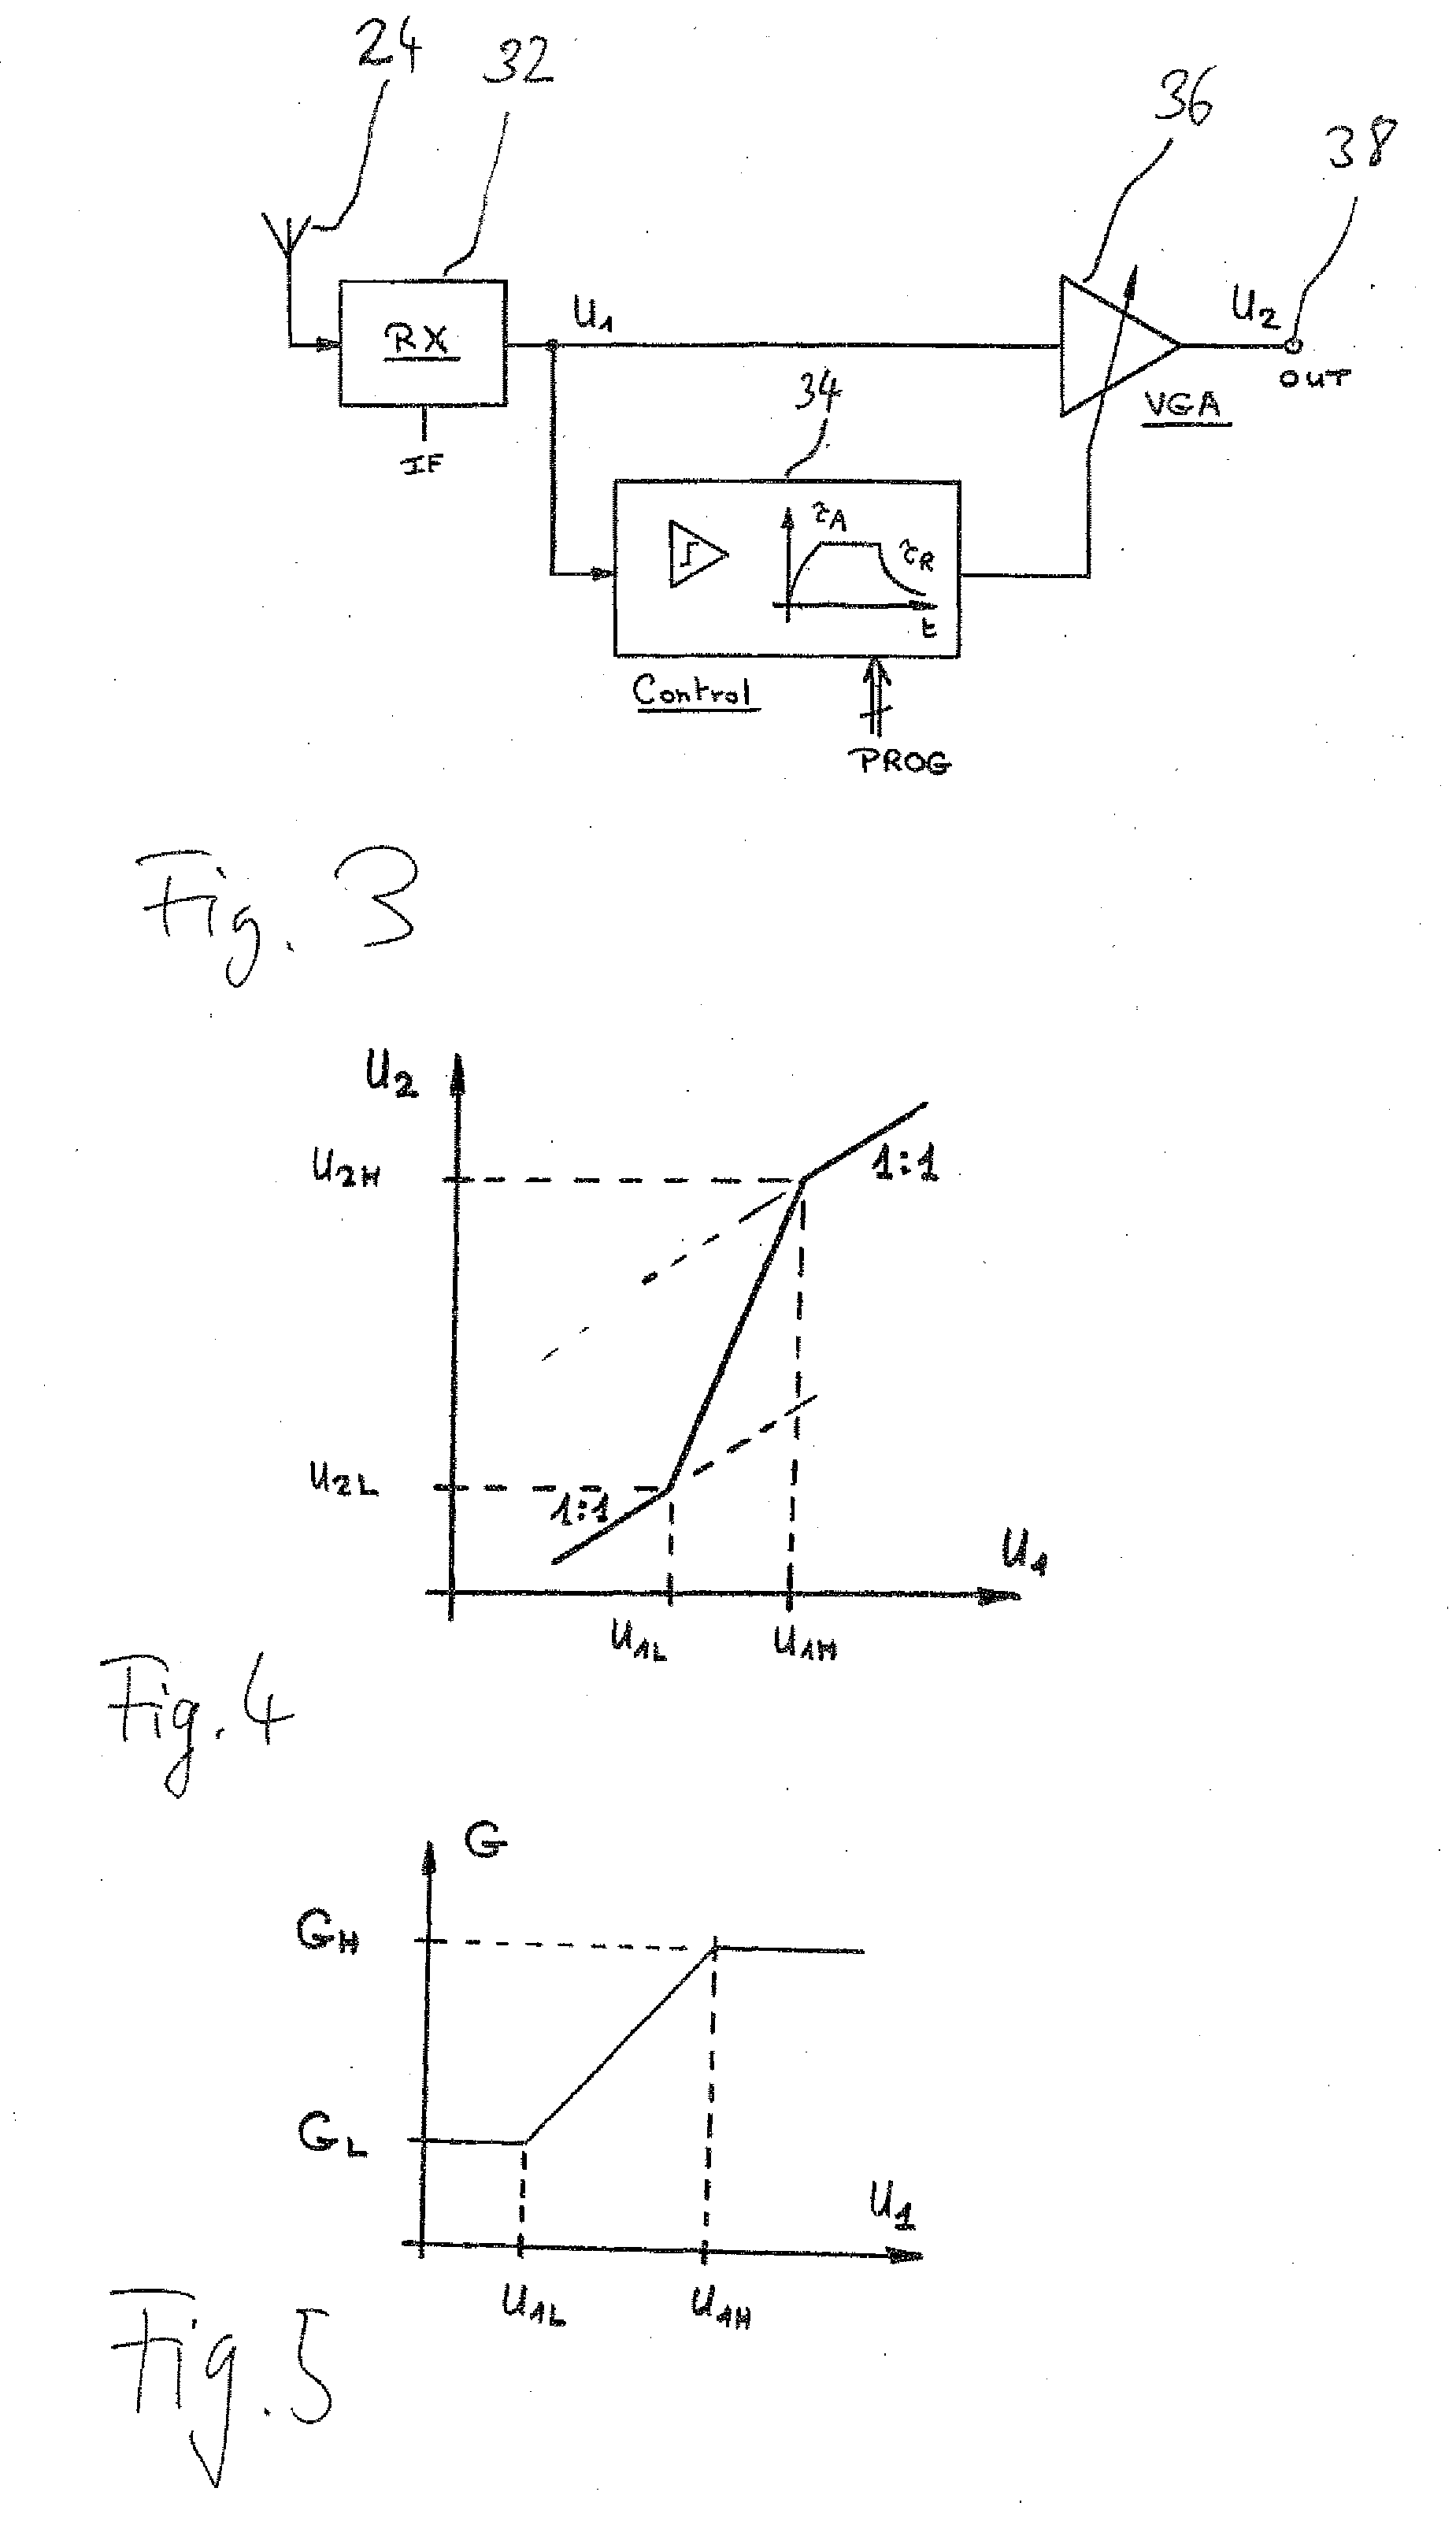 Method and system for providing hearing assistance to a user